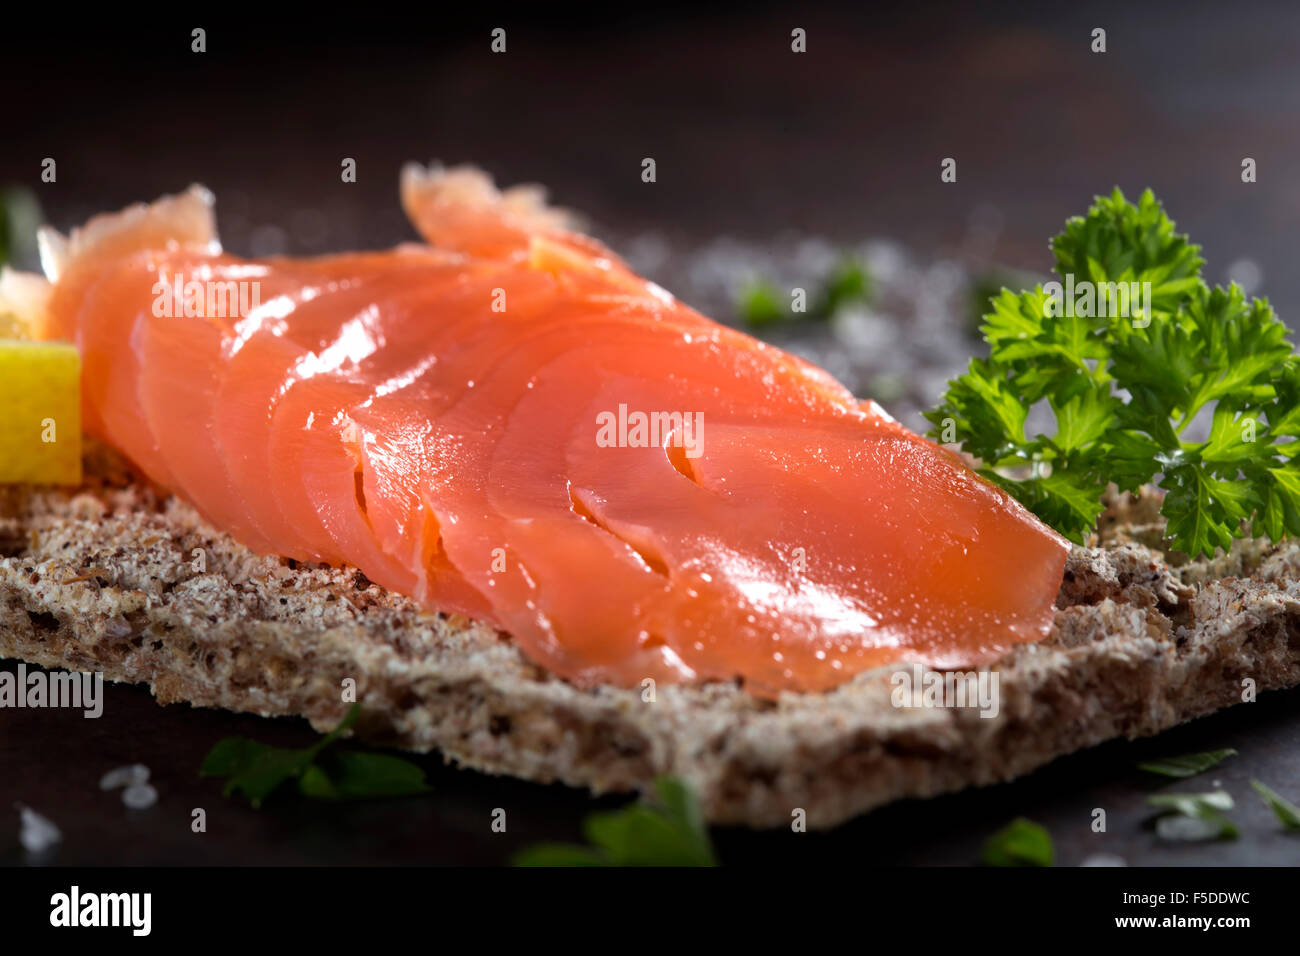 Close-up of smoked salmon served with crackers Stock Photo